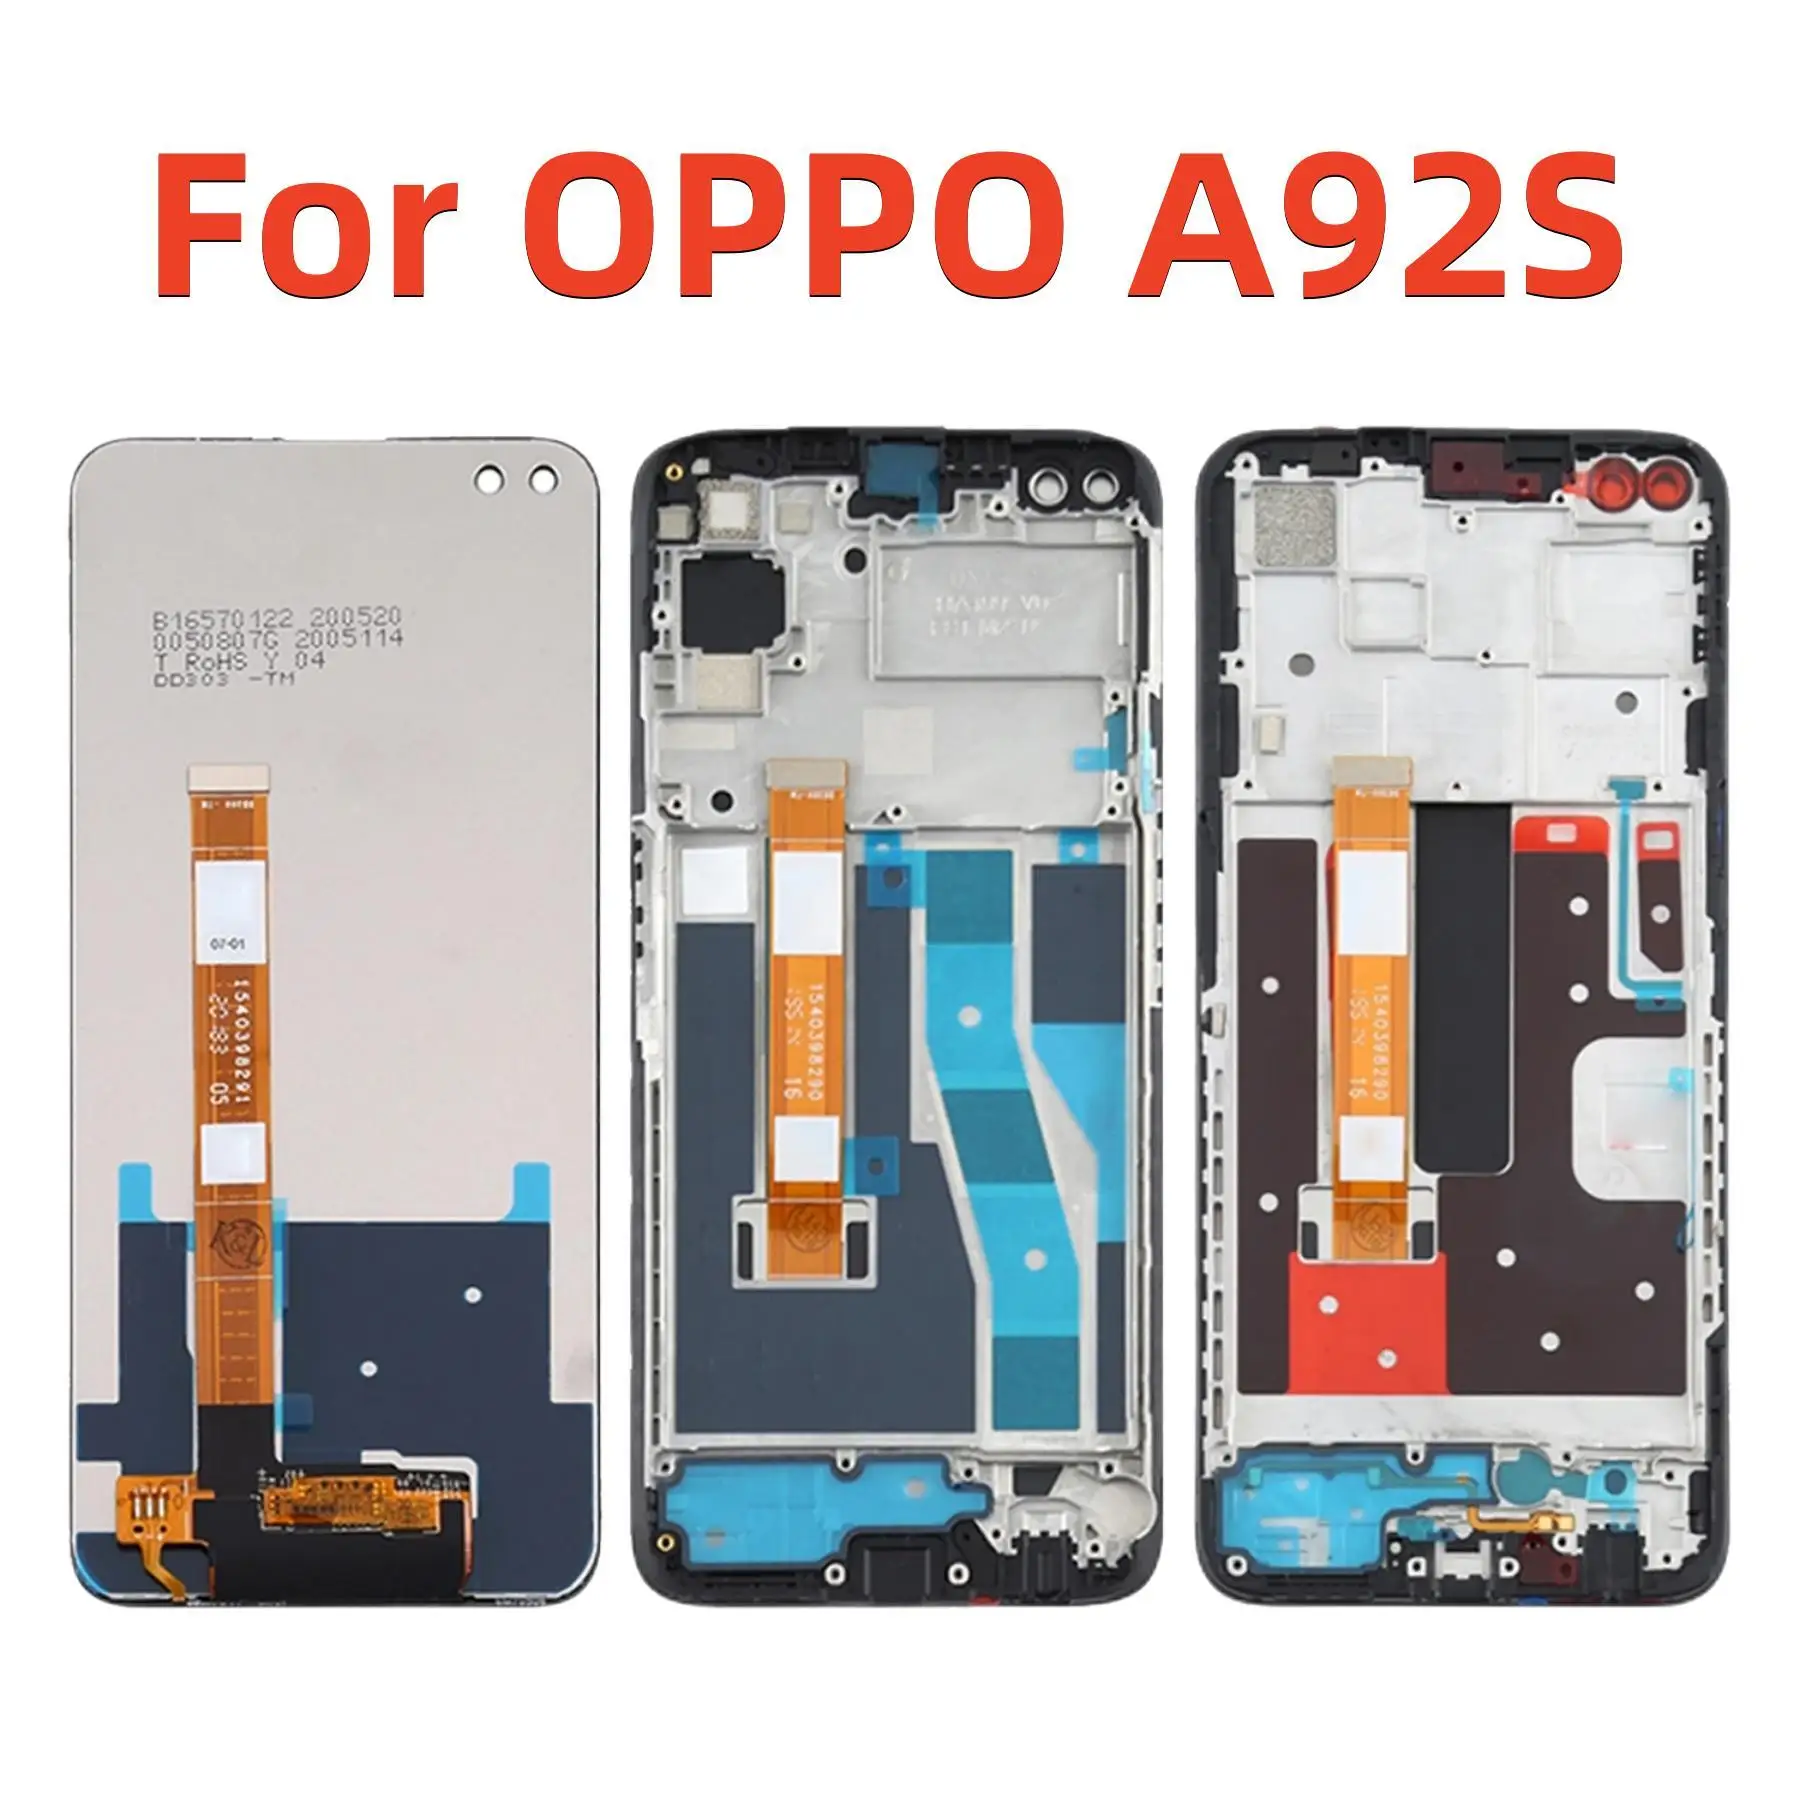 

Original For Realme 6 Pro RMX2061 RMX2063 LCD Display Touch Screen Digitizer Assembly For OPPO A92S PDKM00 LCD Replacement